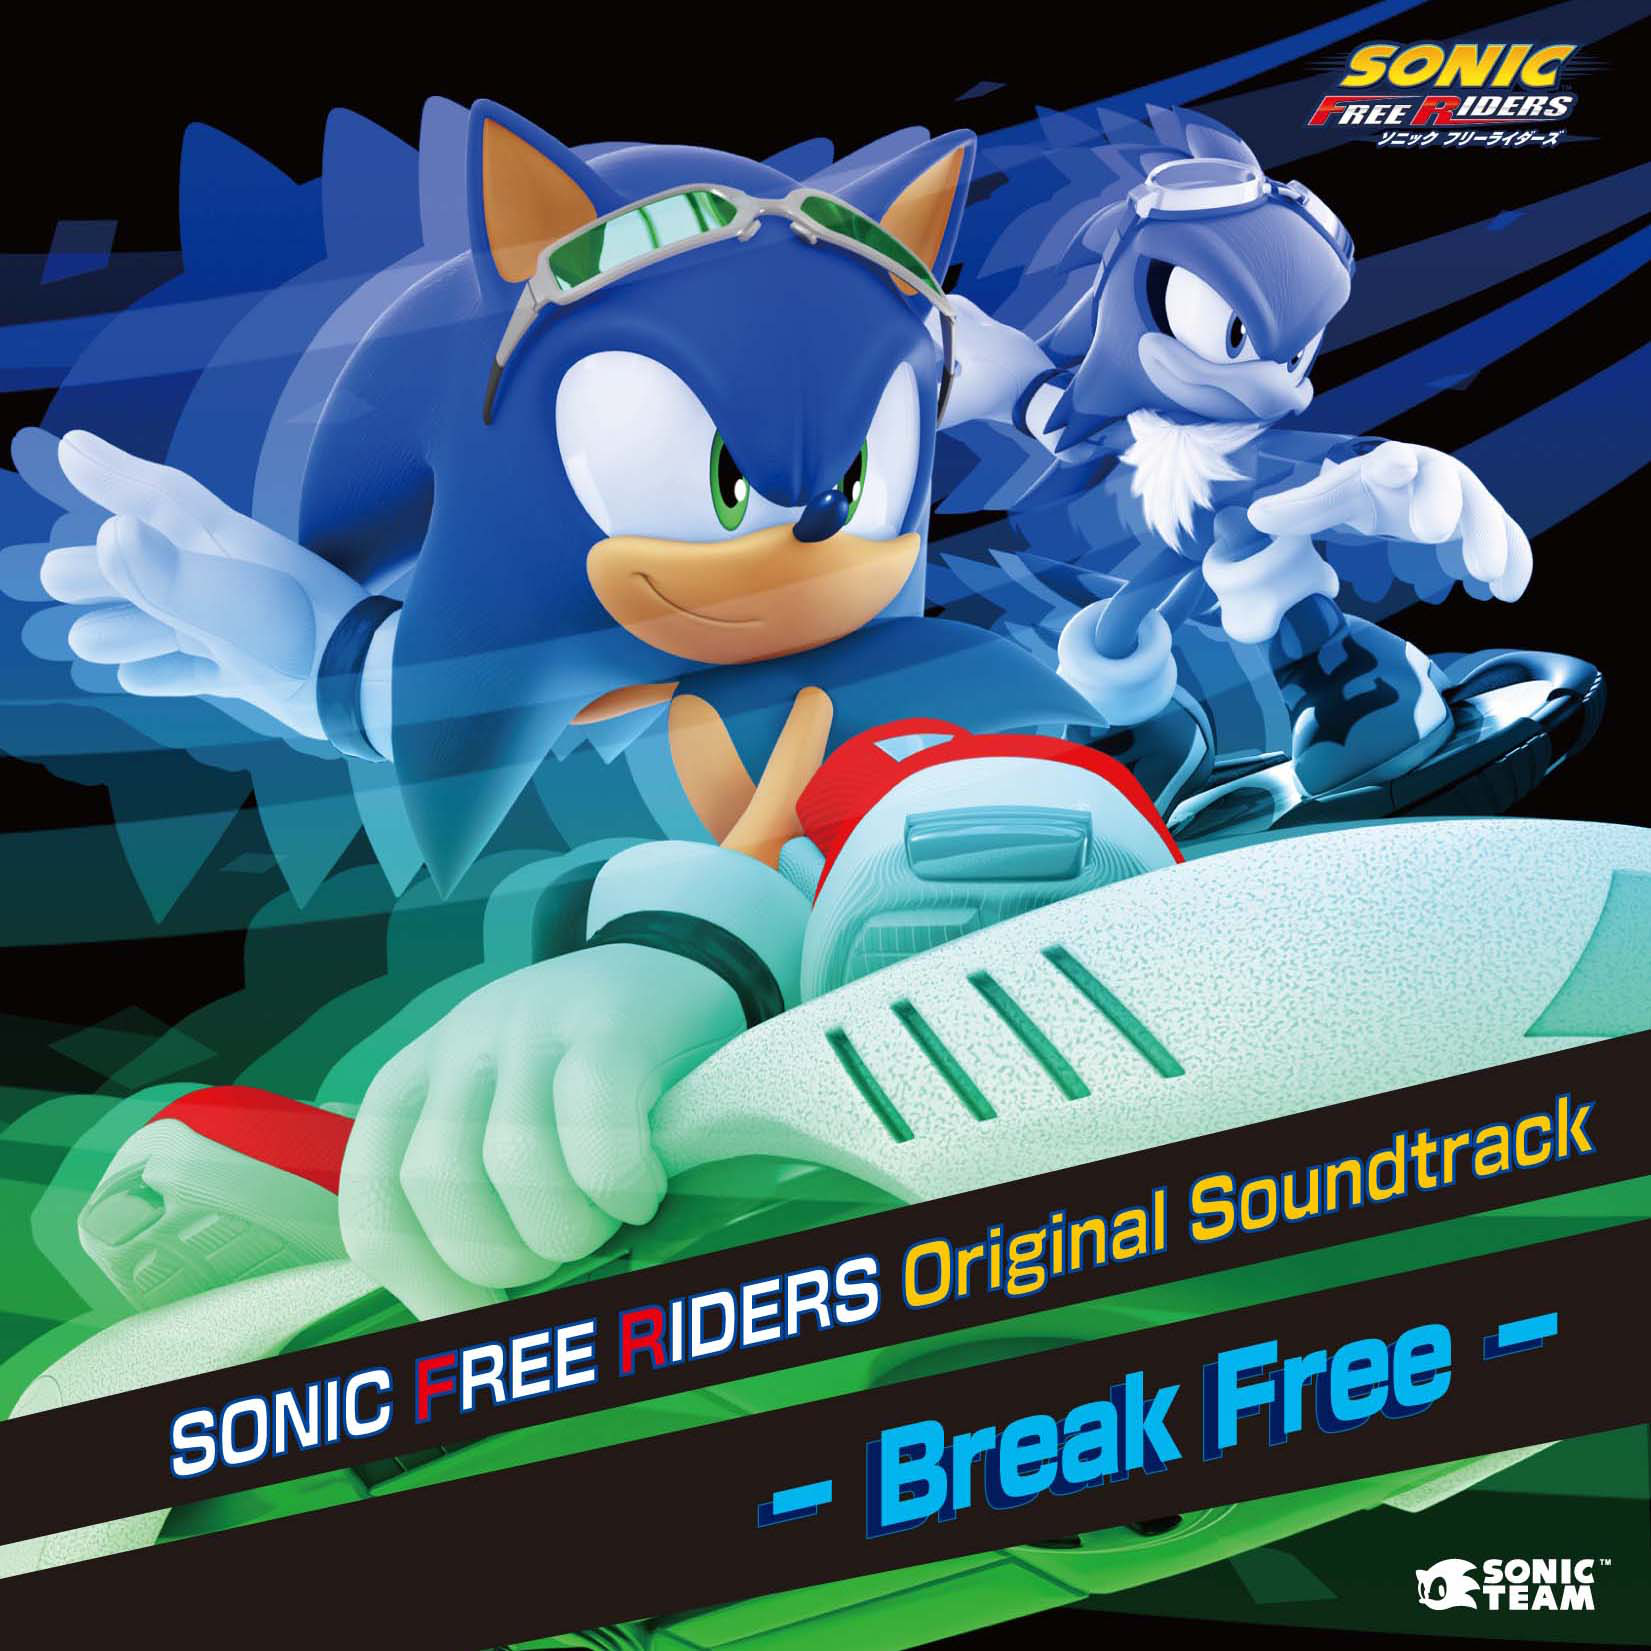 shadow sonic free riders download free